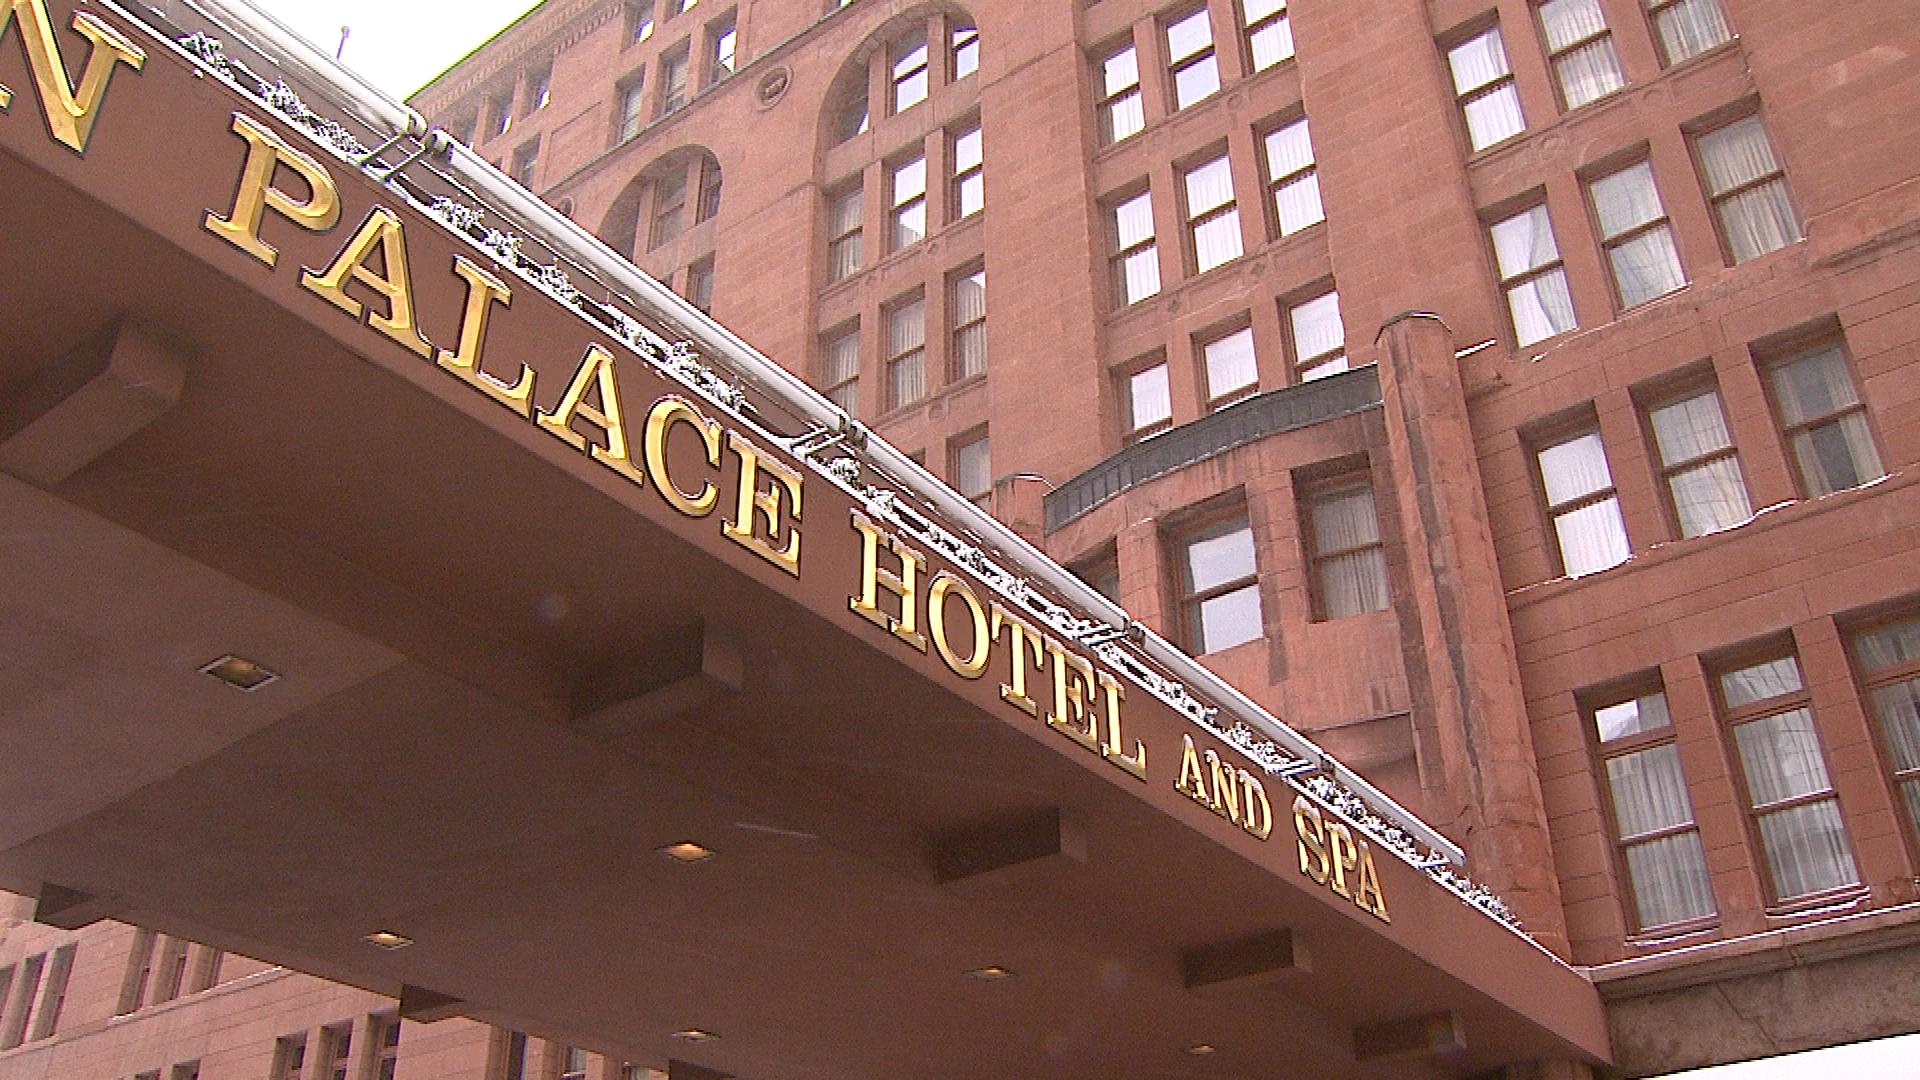 Brown Palace Hotel